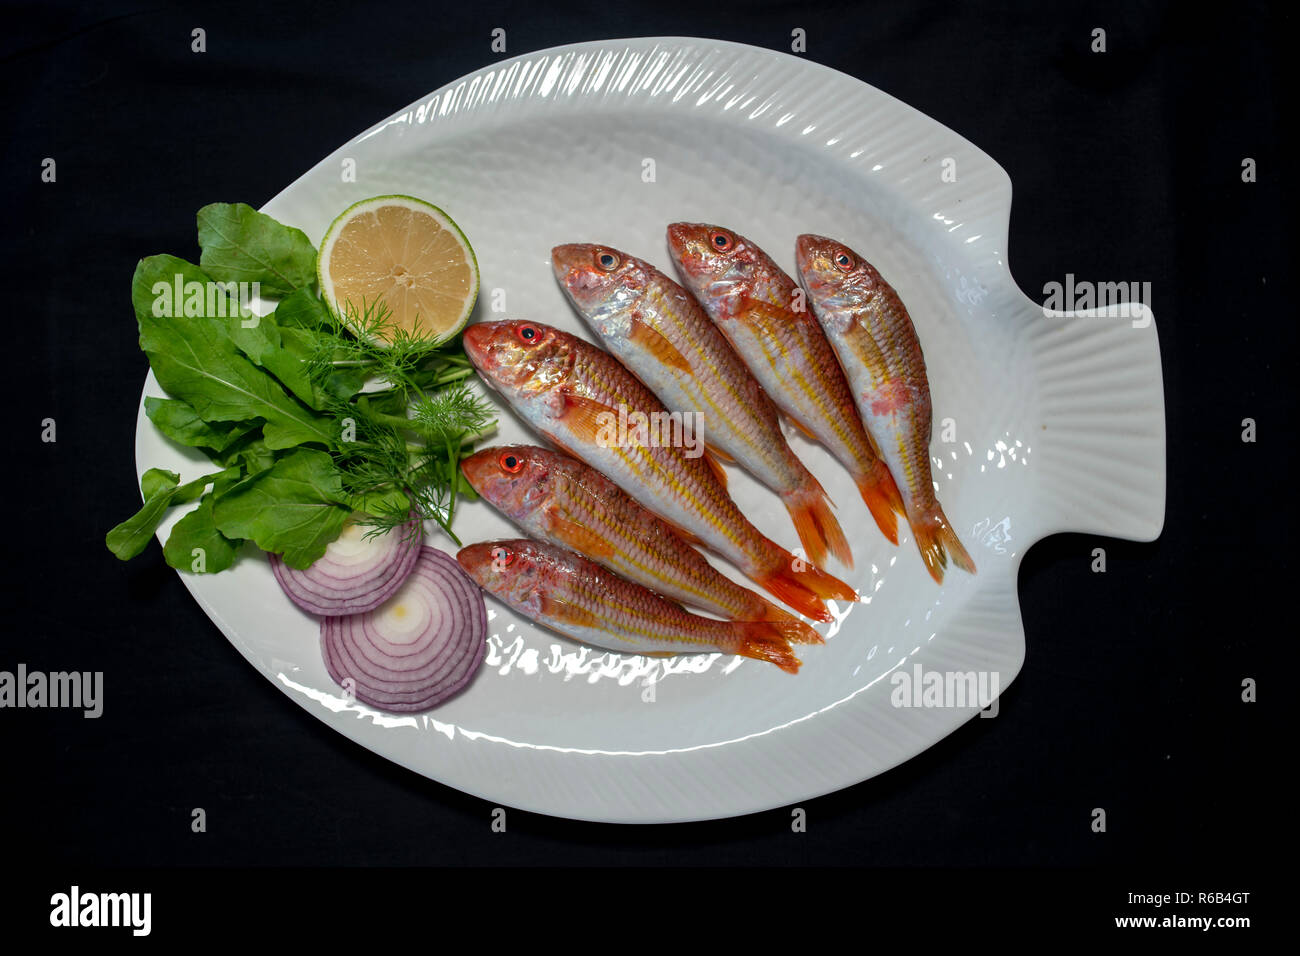 Red mullet fishes with rocket leaves on plate with black background Stock Photo